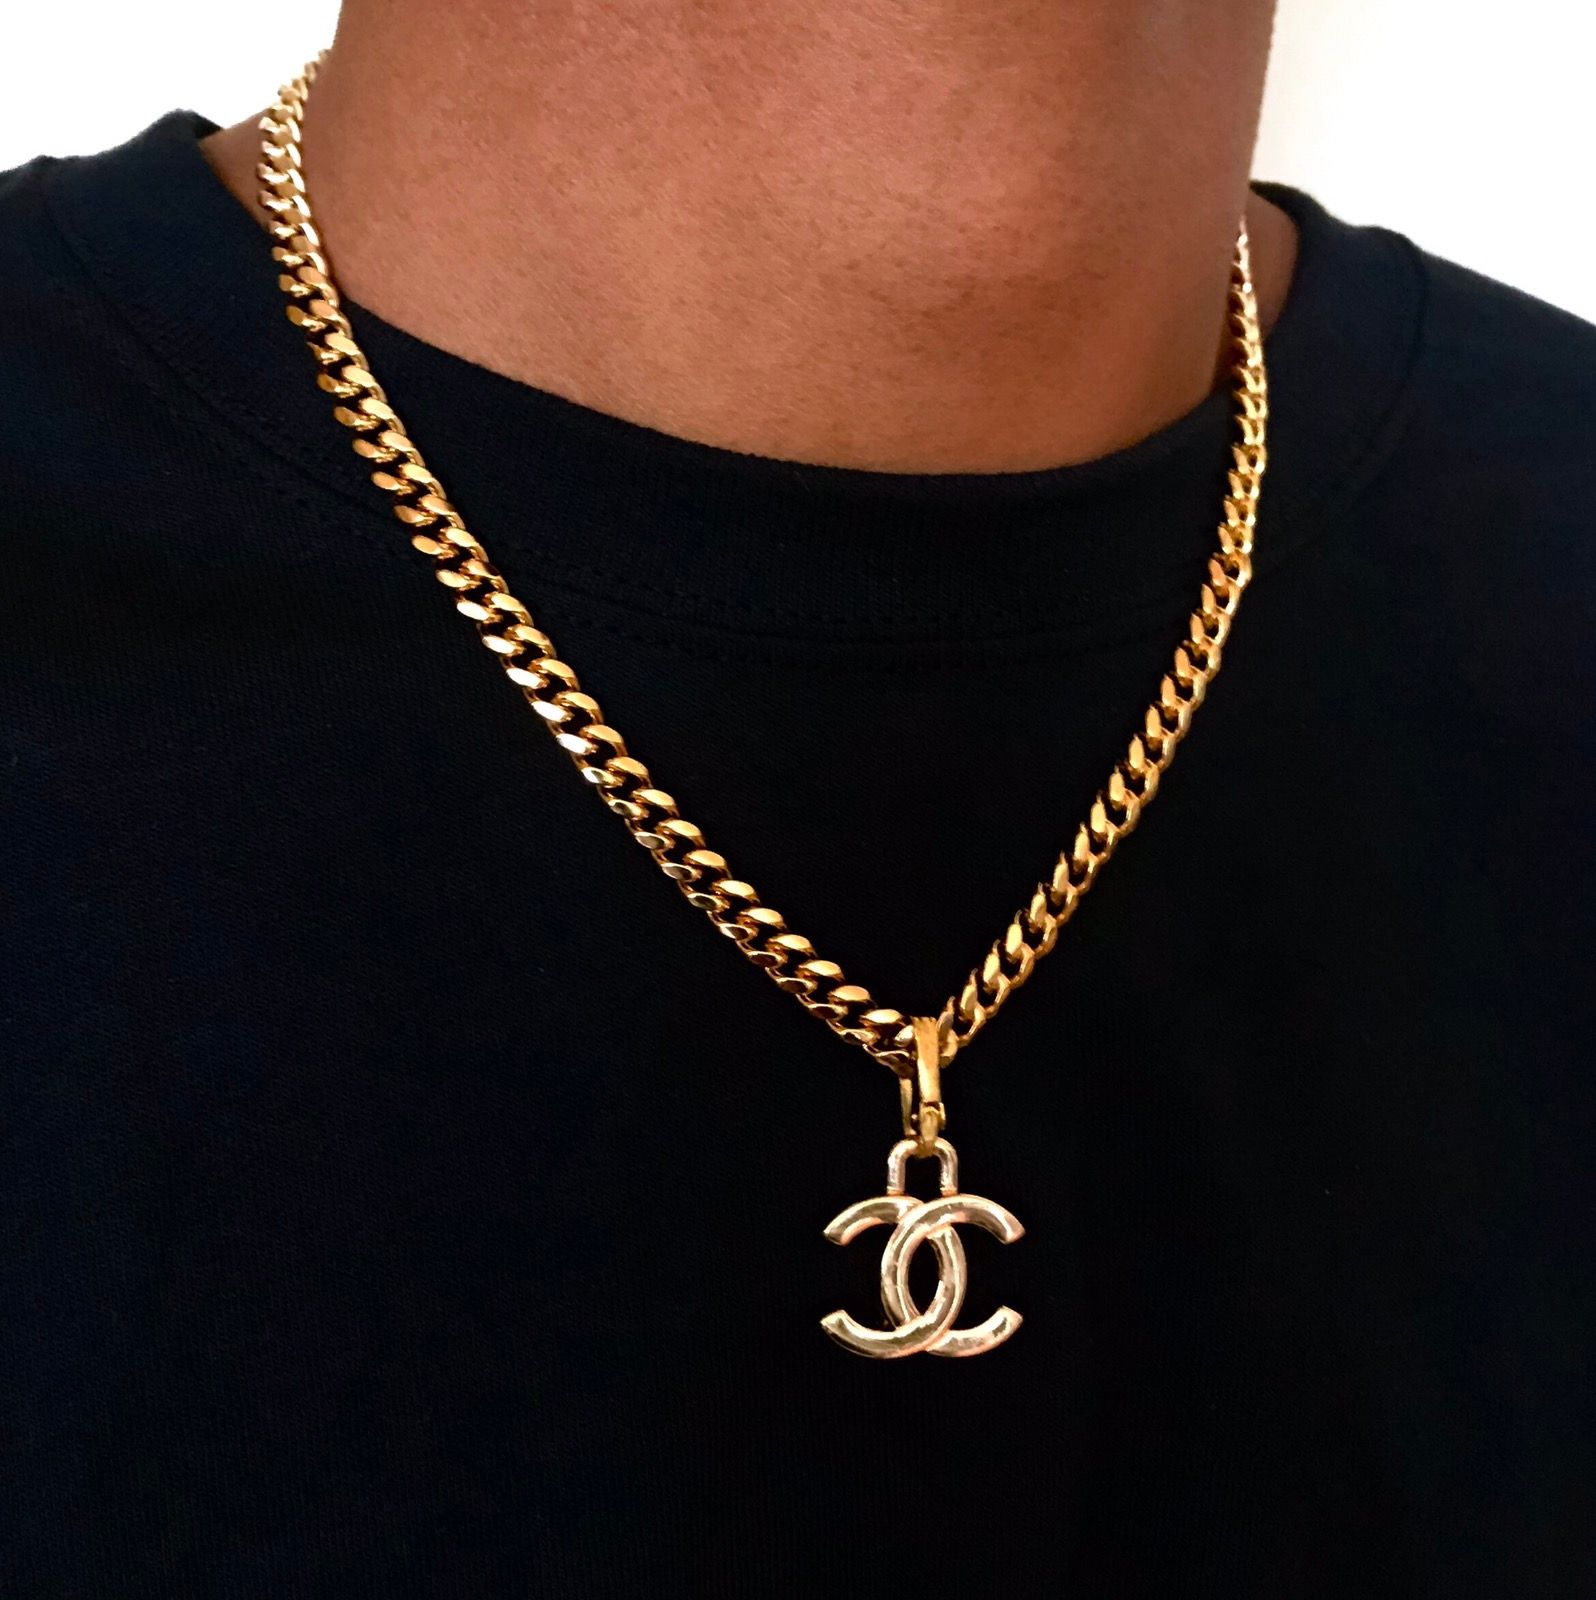 Chanel RARE Chanel CC Logo Gold Cuban Link Chain Double C Necklace